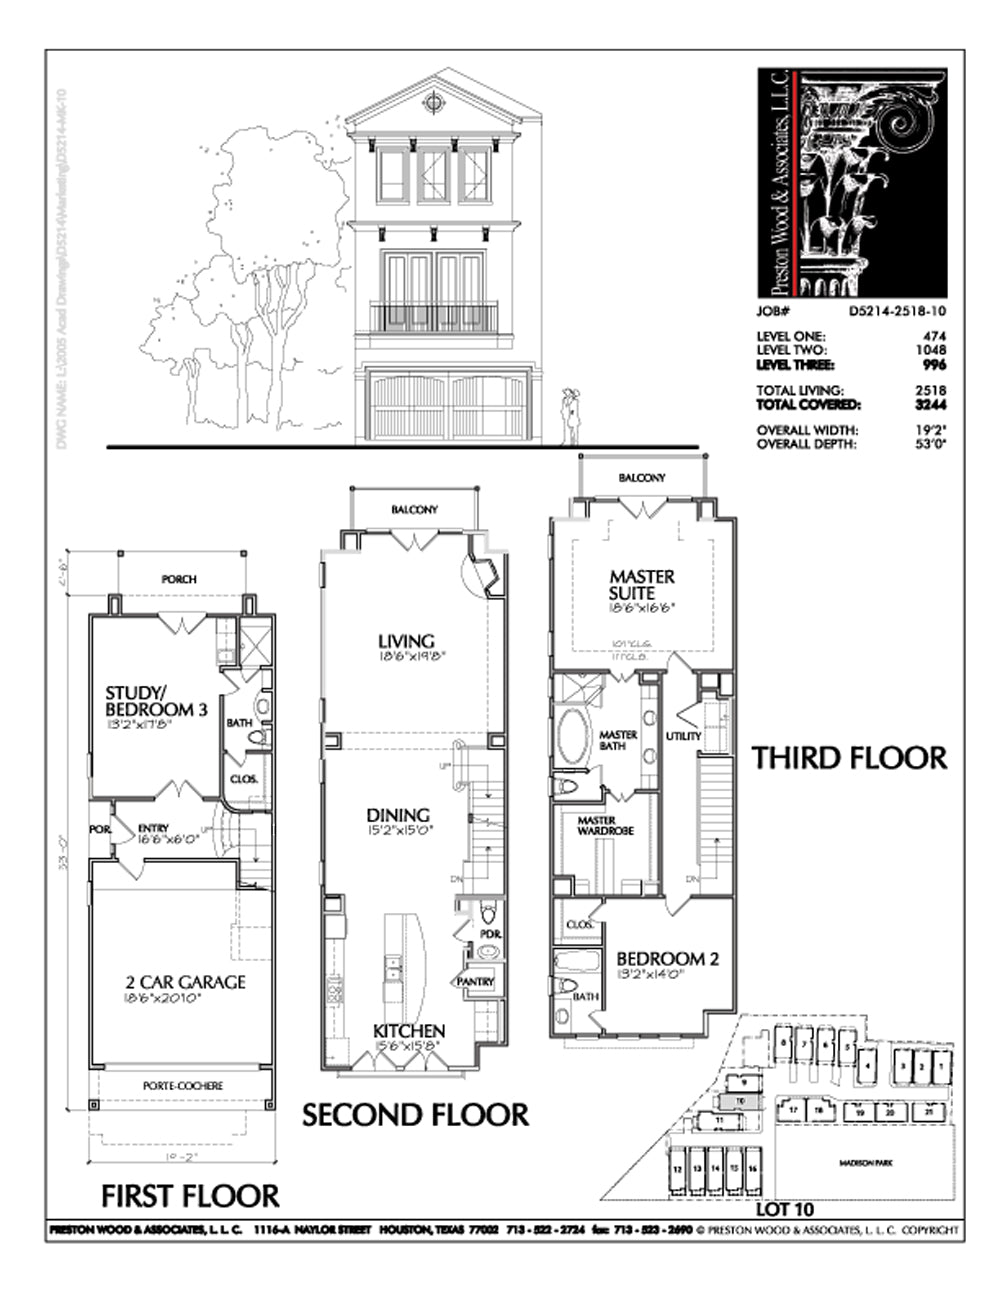 Narrow Townhome Plans Online, Brownstone Style Homes, Town